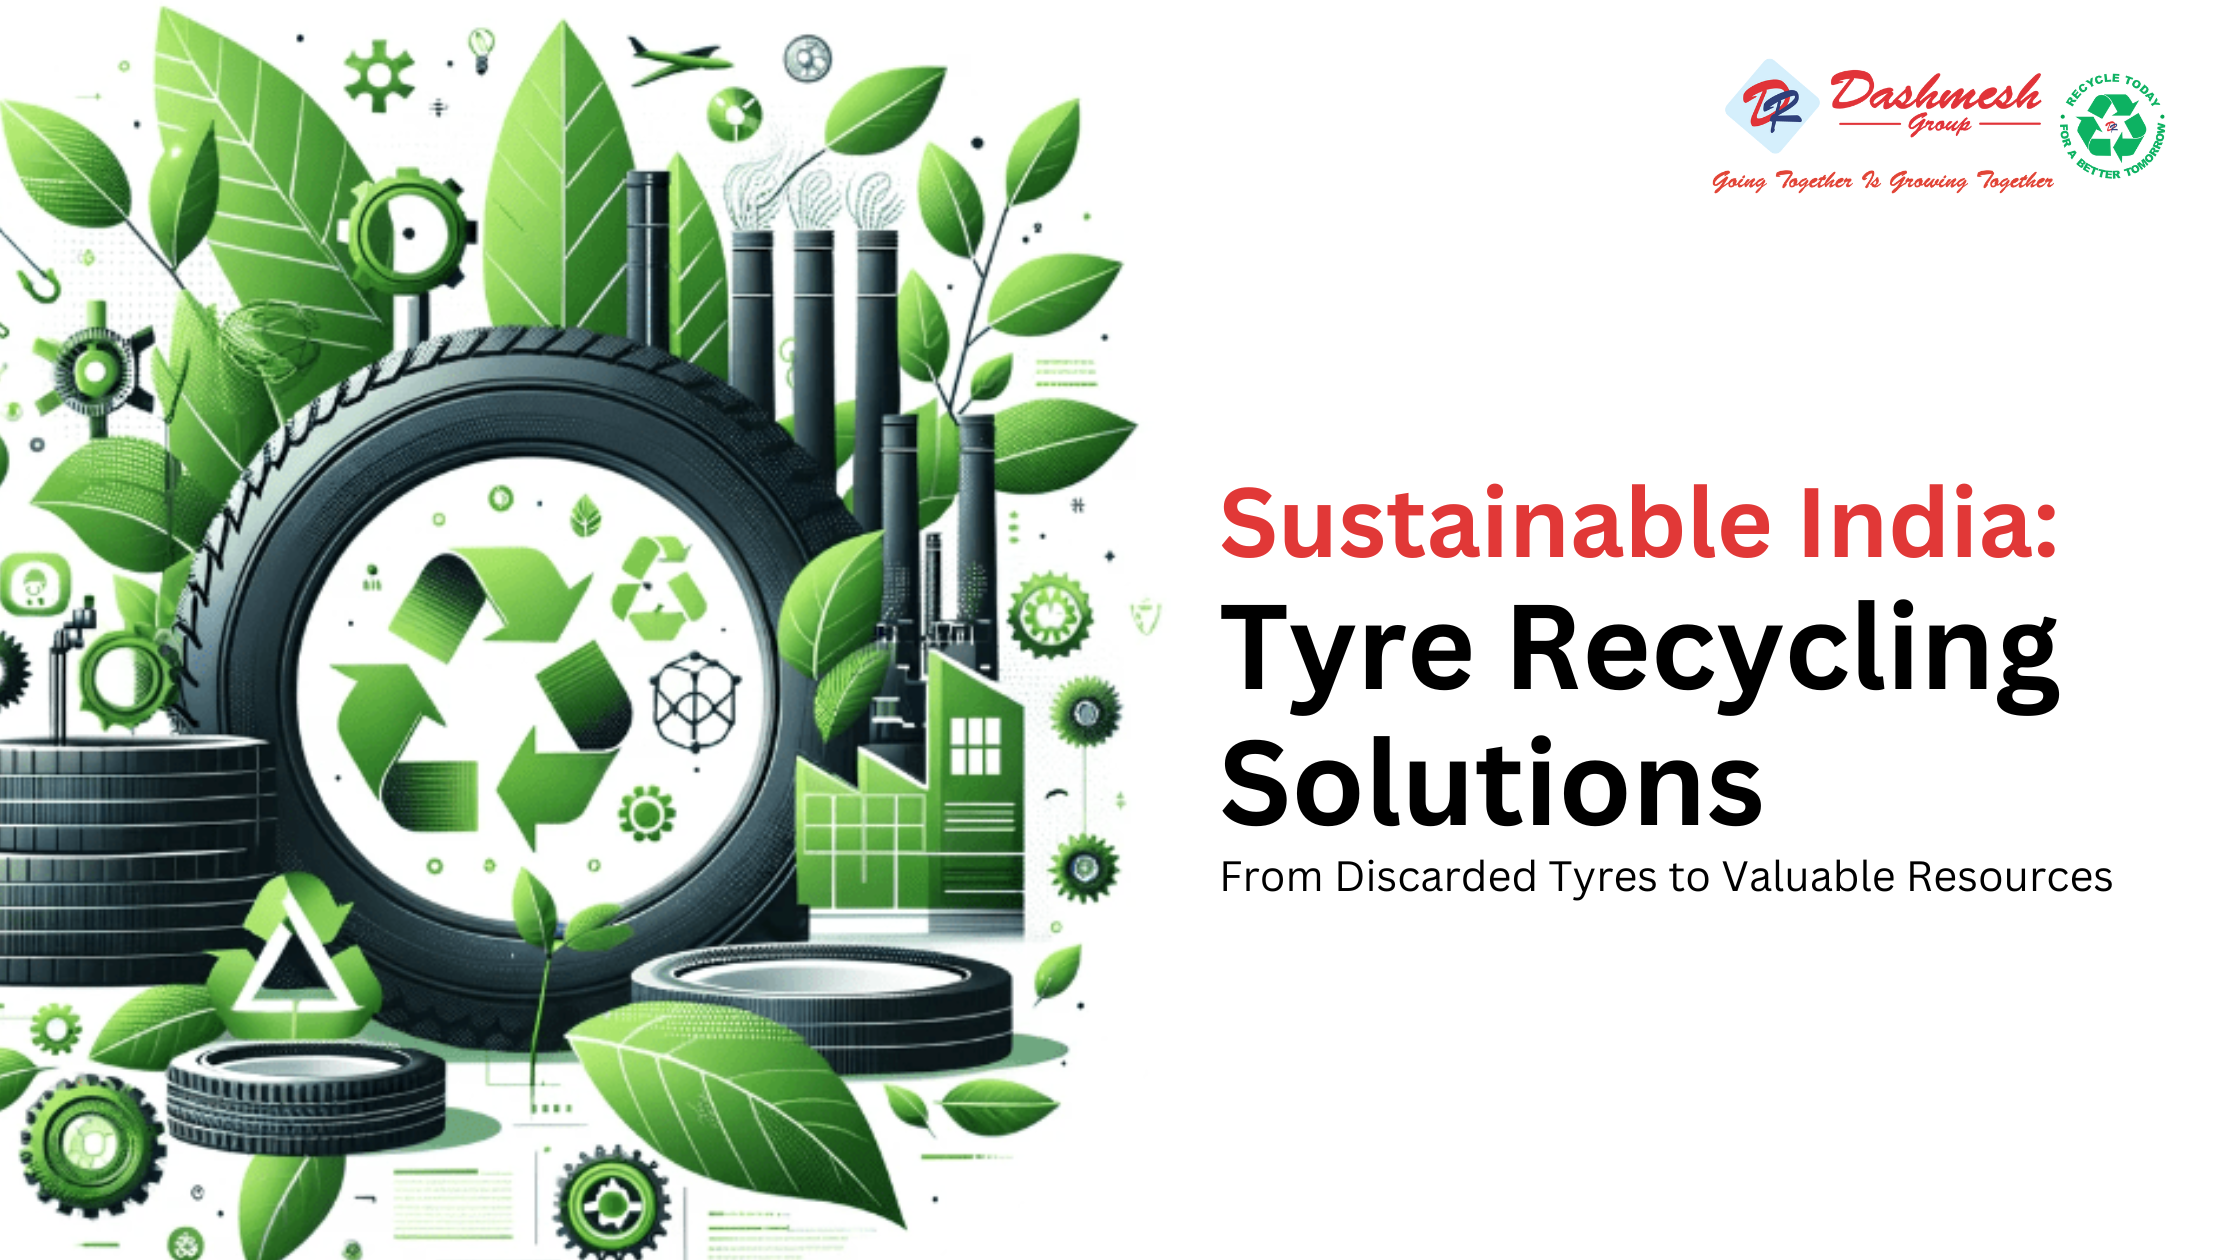 Sustainable India: Tyre Recycling Solutions - From Discarded Tyres to Valuable Resources